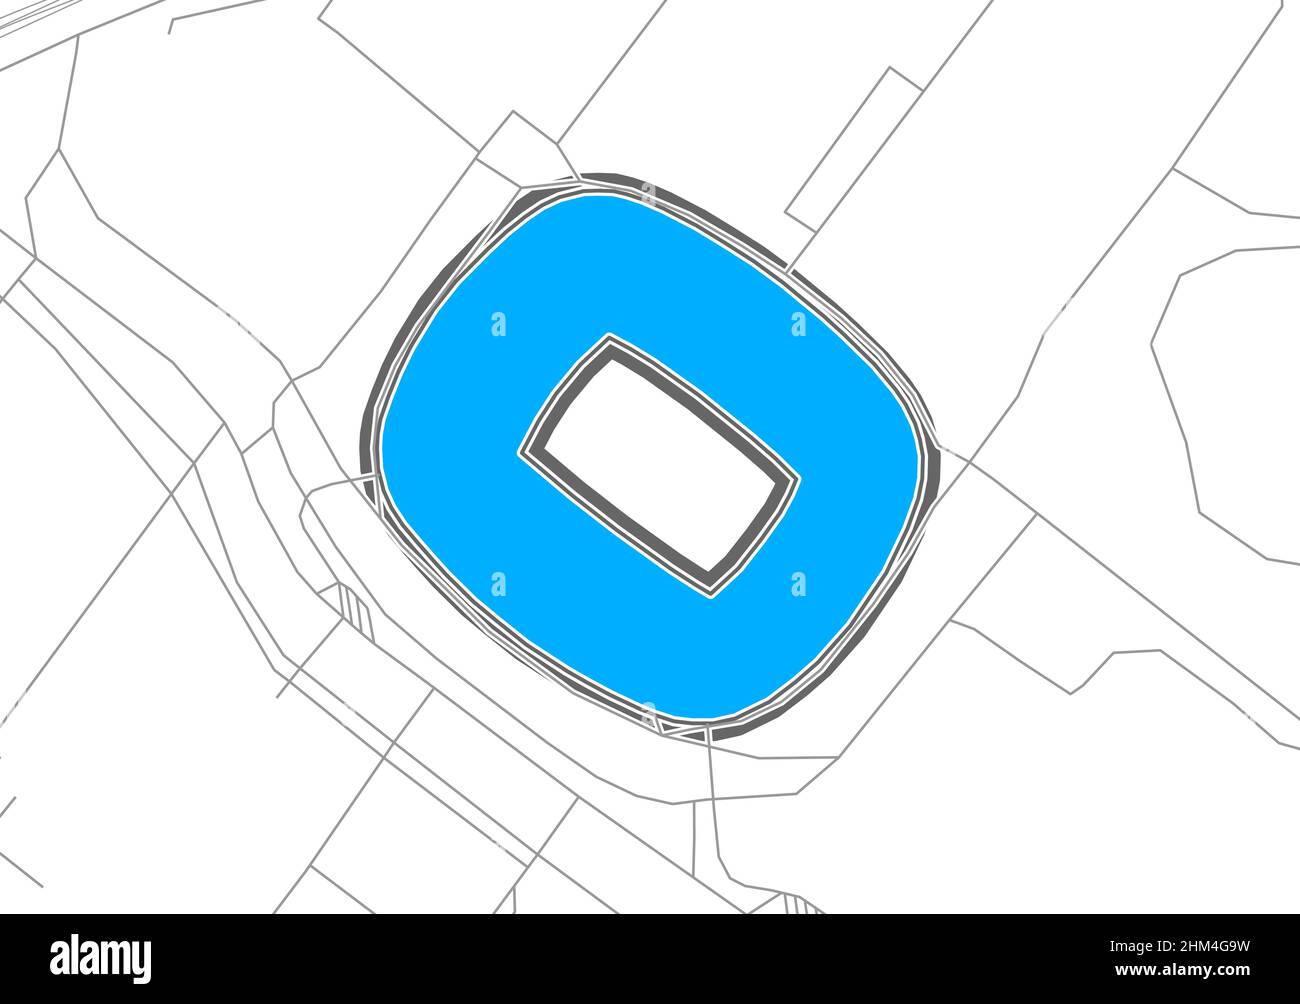 Frankfurt, Football Stadium, outline vector map. The bundesliga statium map was drawn with white areas and lines for main roads, side roads. Stock Vector